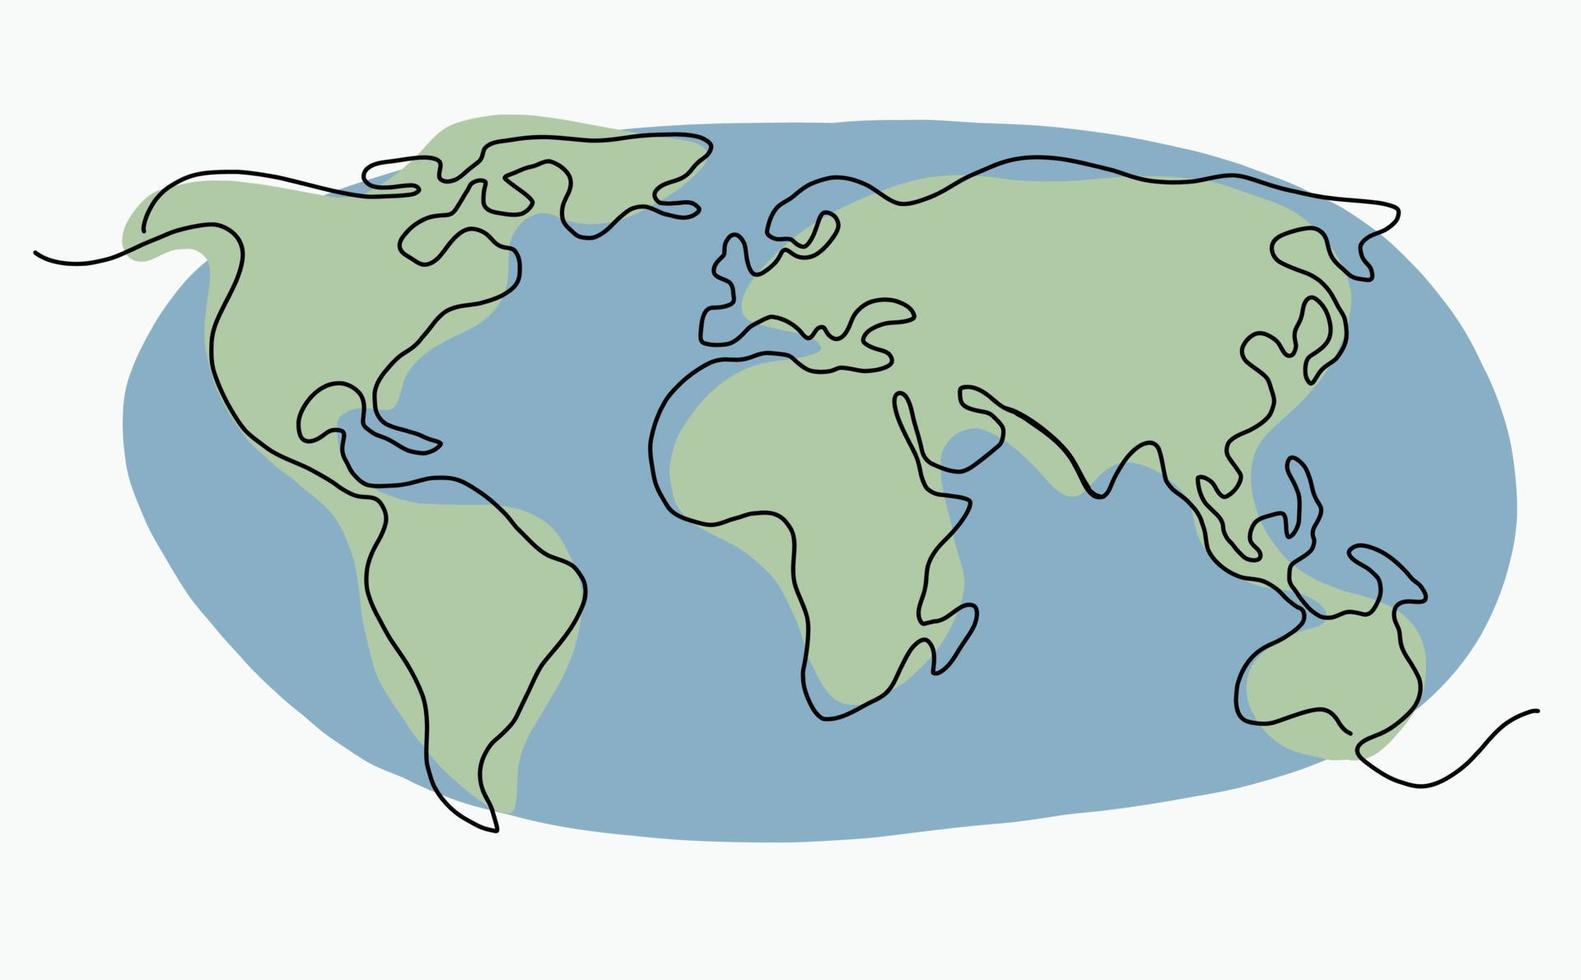 Continuous freehand drawing world map. vector